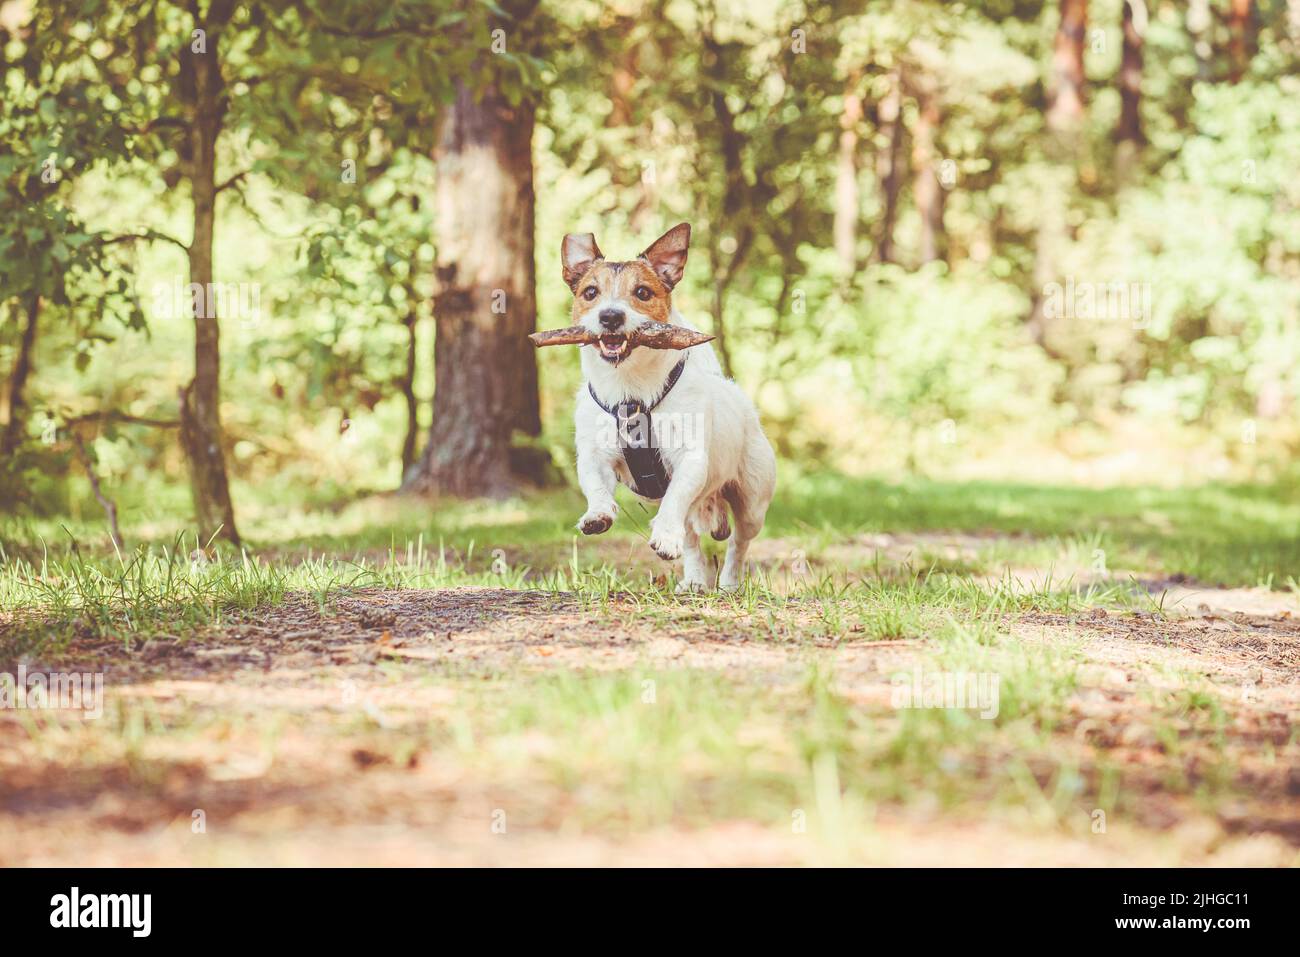 Dog with small stick running on path for hikers in wild woods Stock Photo